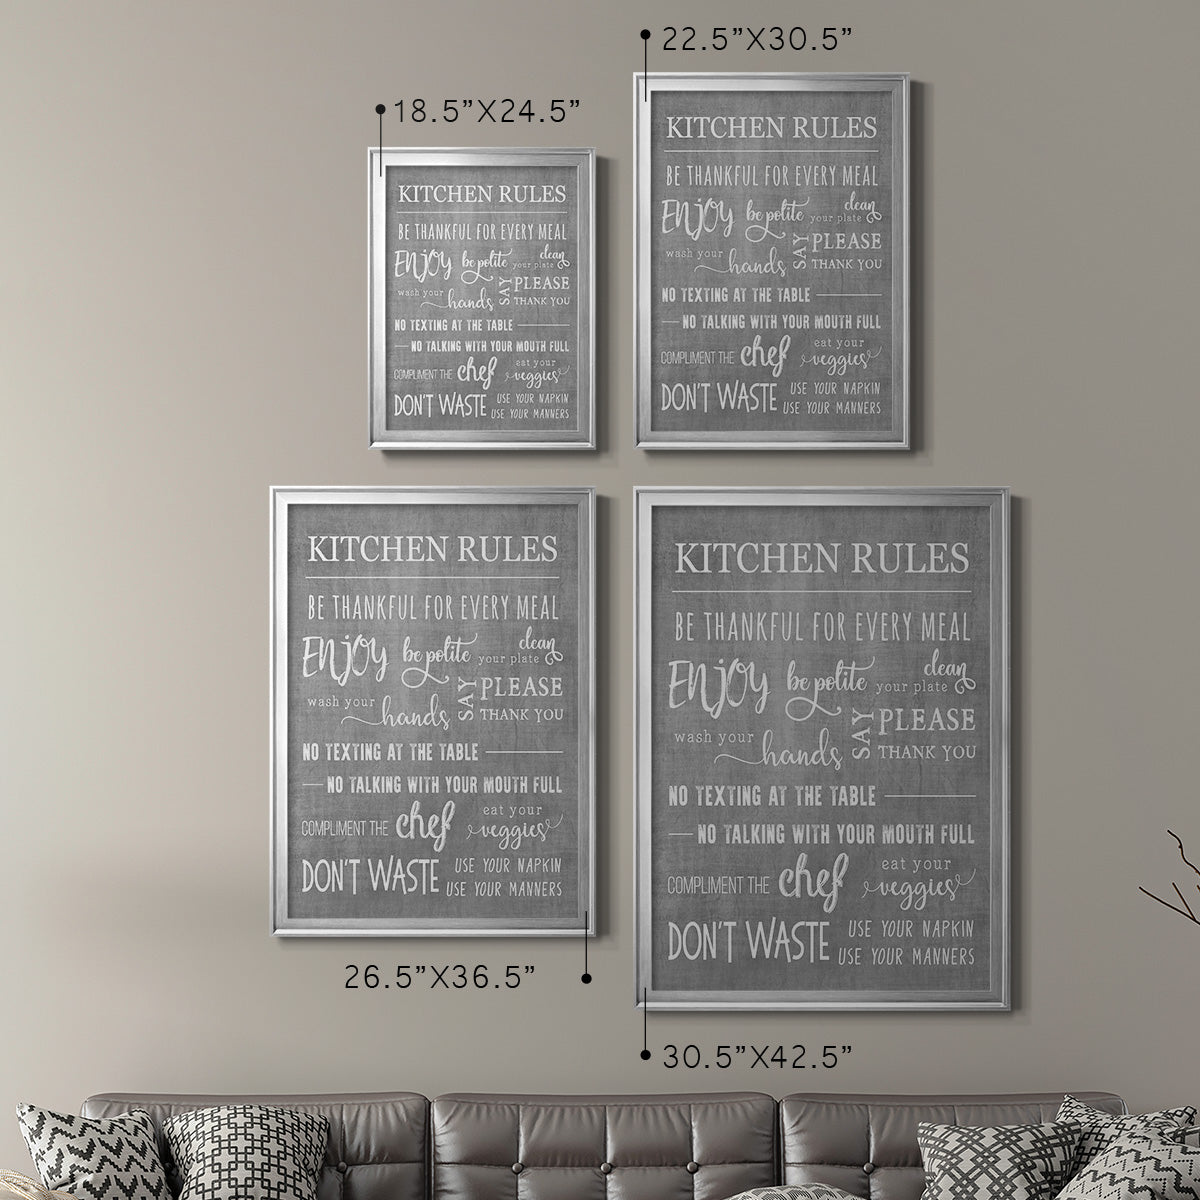 Neutral Kitchen Rules Premium Framed Print - Ready to Hang